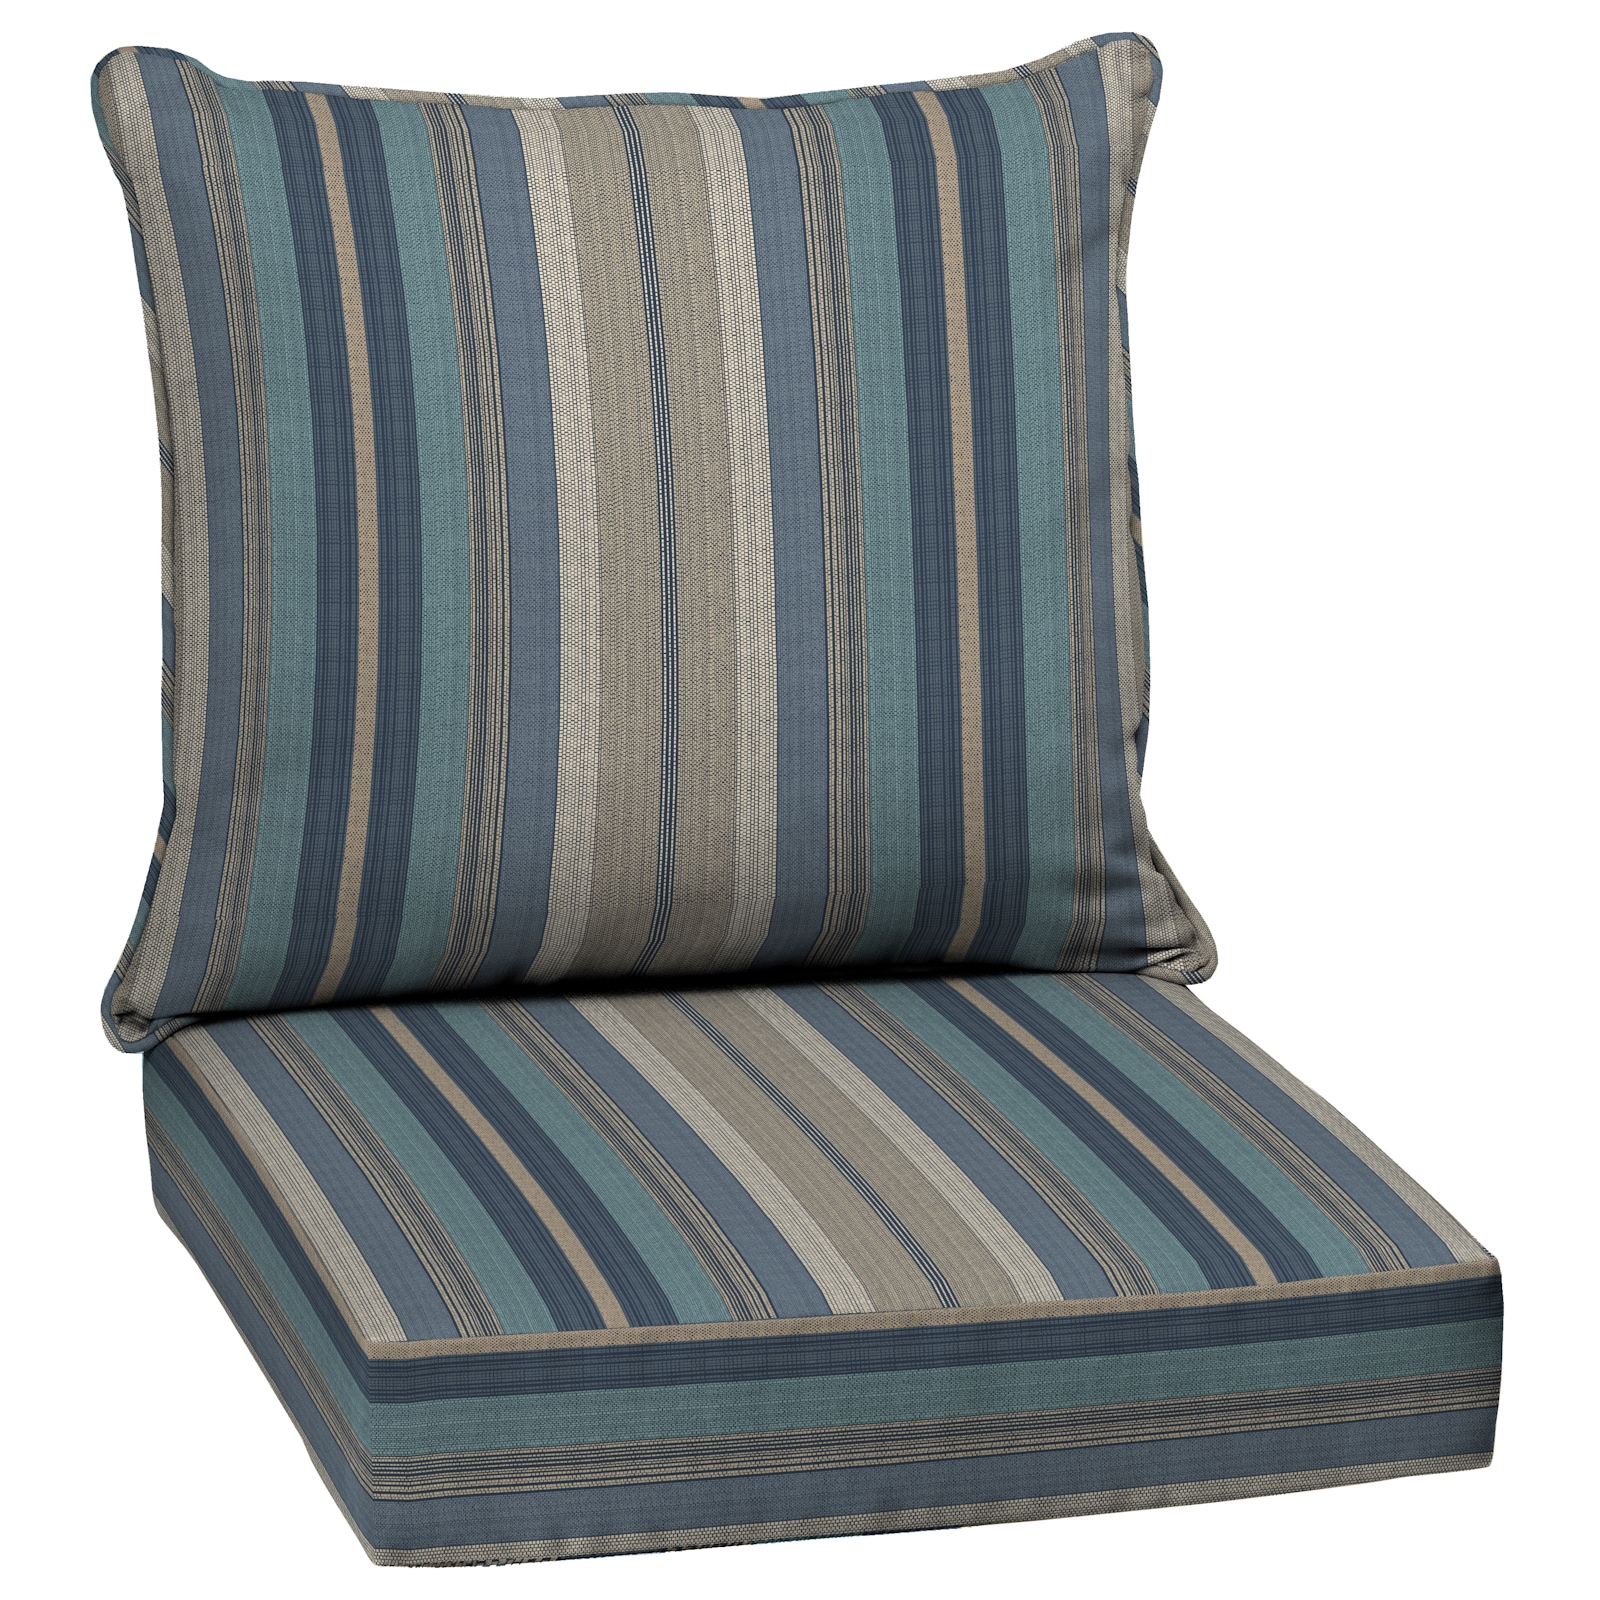 Allen Roth 2 Piece Deep Seat Patio Chair Cushion In The Furniture Cushions Department At Com - Allen And Roth Patio Pillow